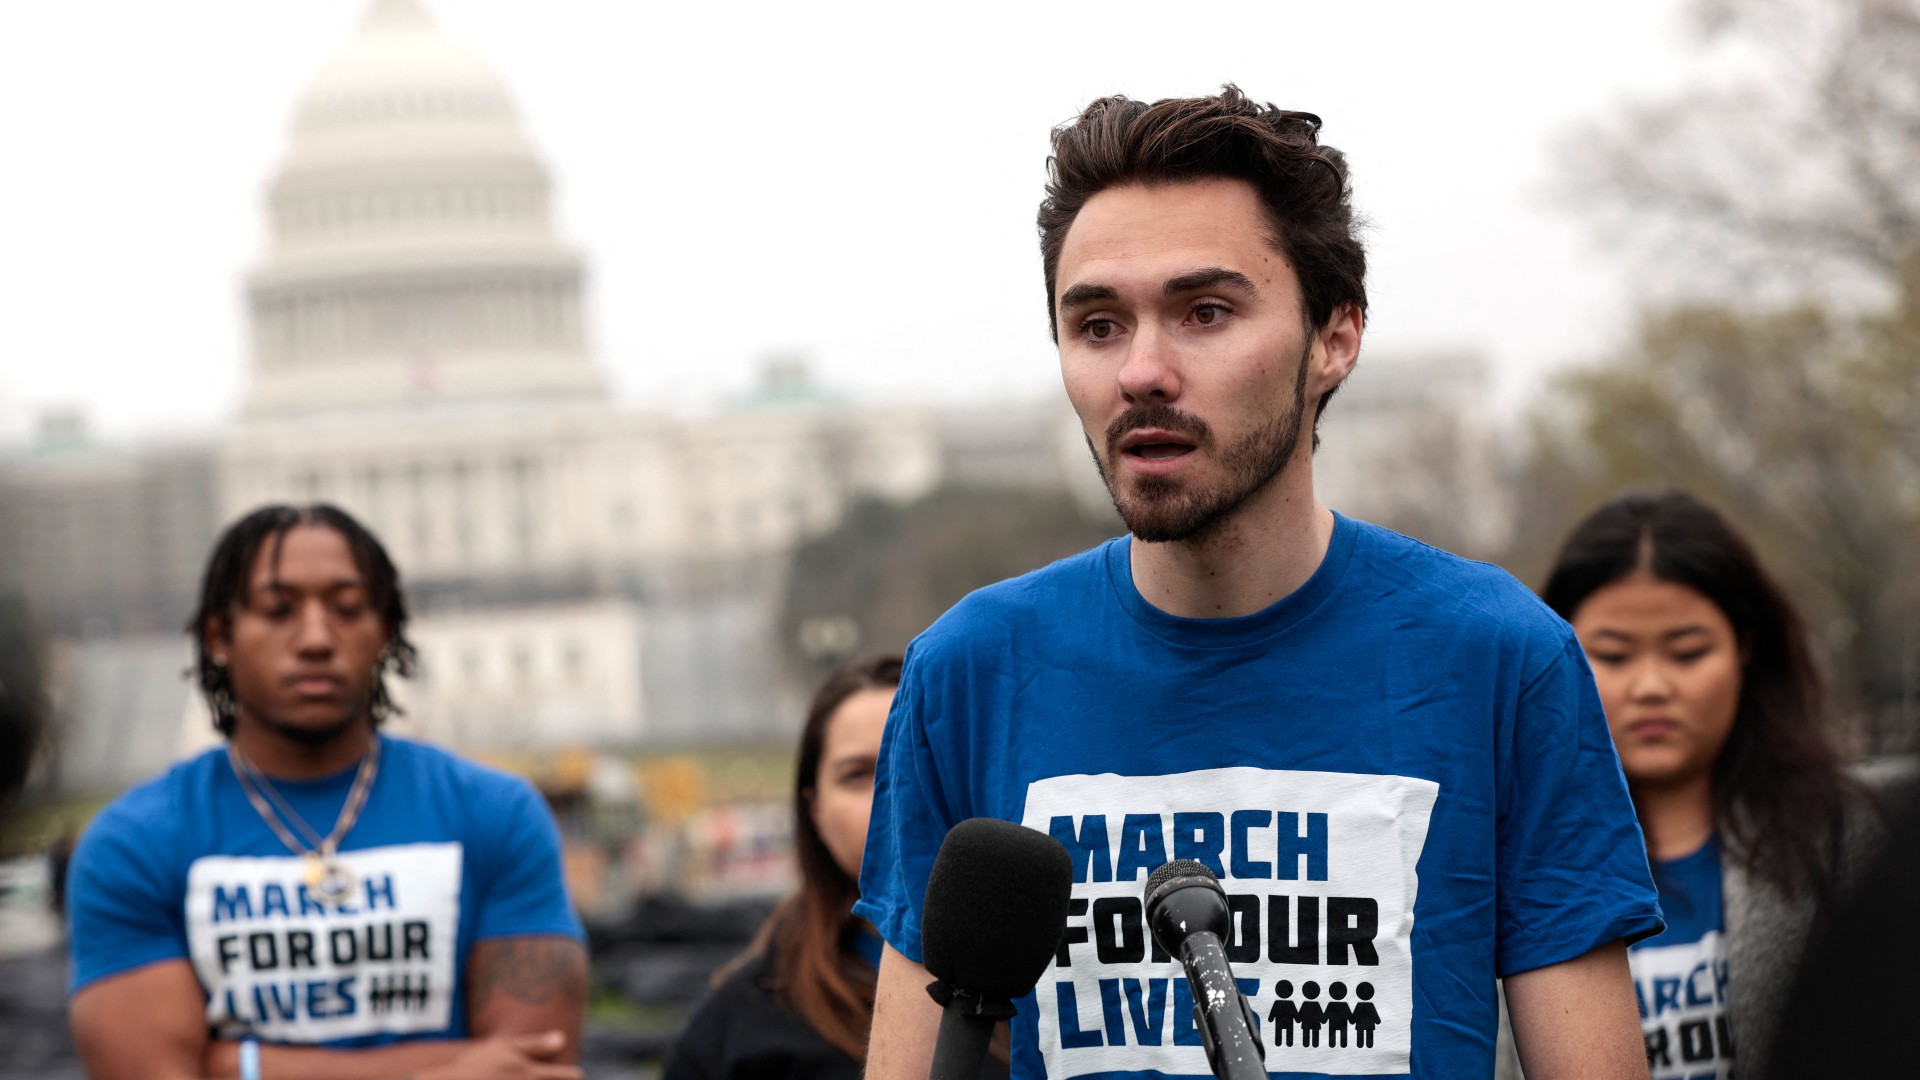 arjory Stoneman Douglas High School shooting survivor David Hogg speaks in front of reporters at an installation of body bags assembled on the National Mall by Gun Control activist group March For Our Lives on March 24, 2022 in Washington, DC.